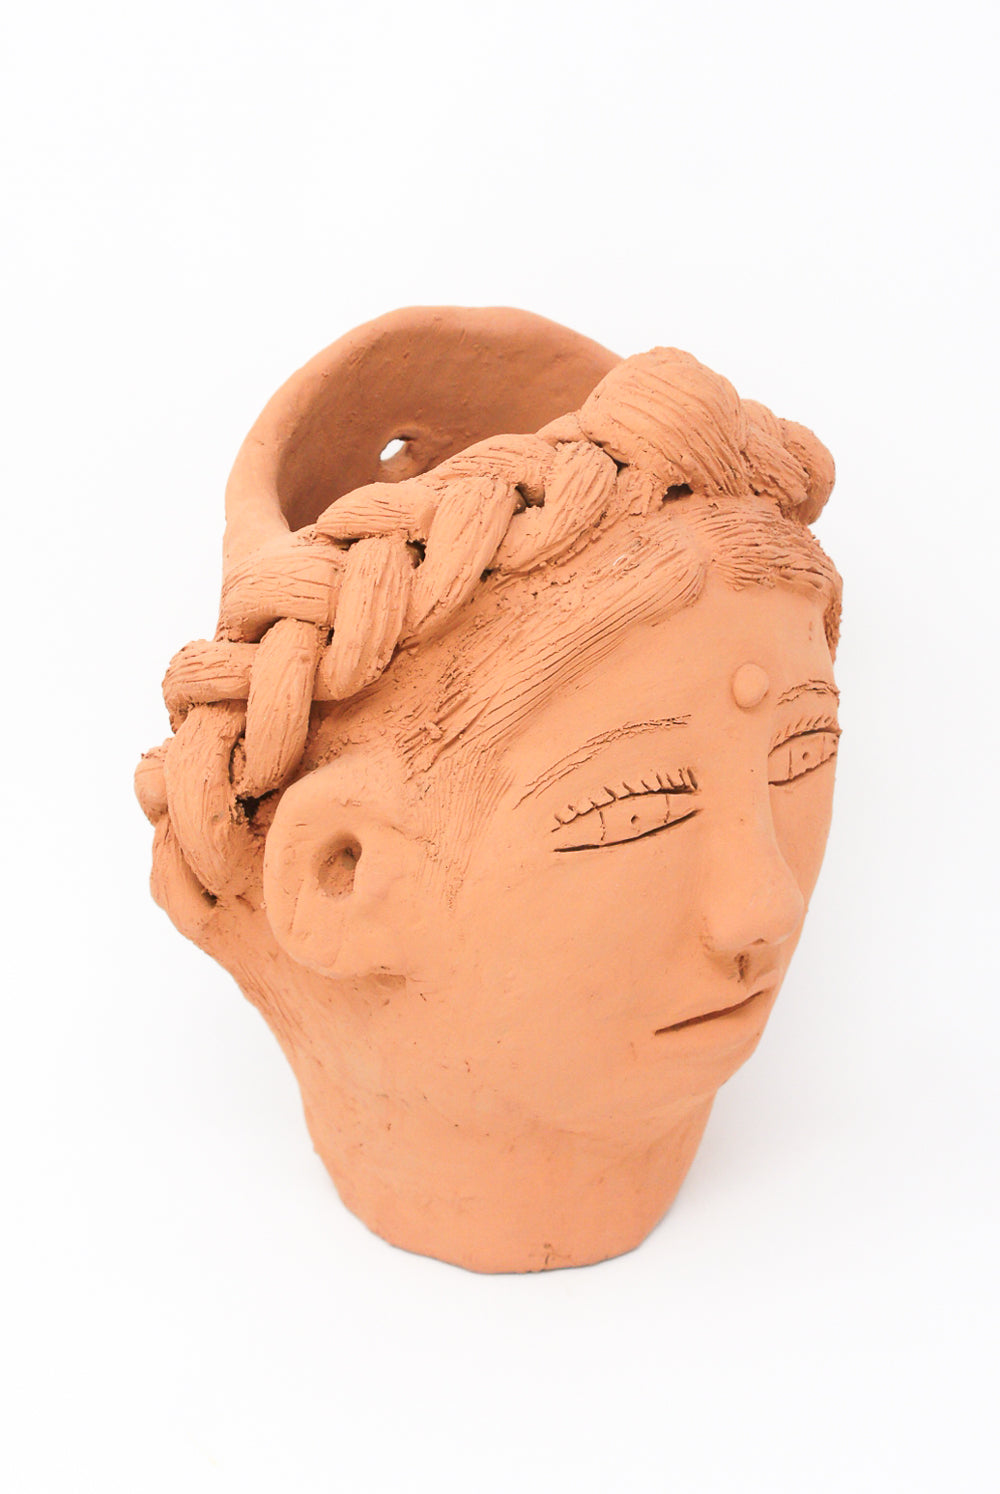 A Large Head Planter in Terracotta from Oaxaca of a stylized human head with detailed hair and facial features, designed as a large head planter by Travel Find.